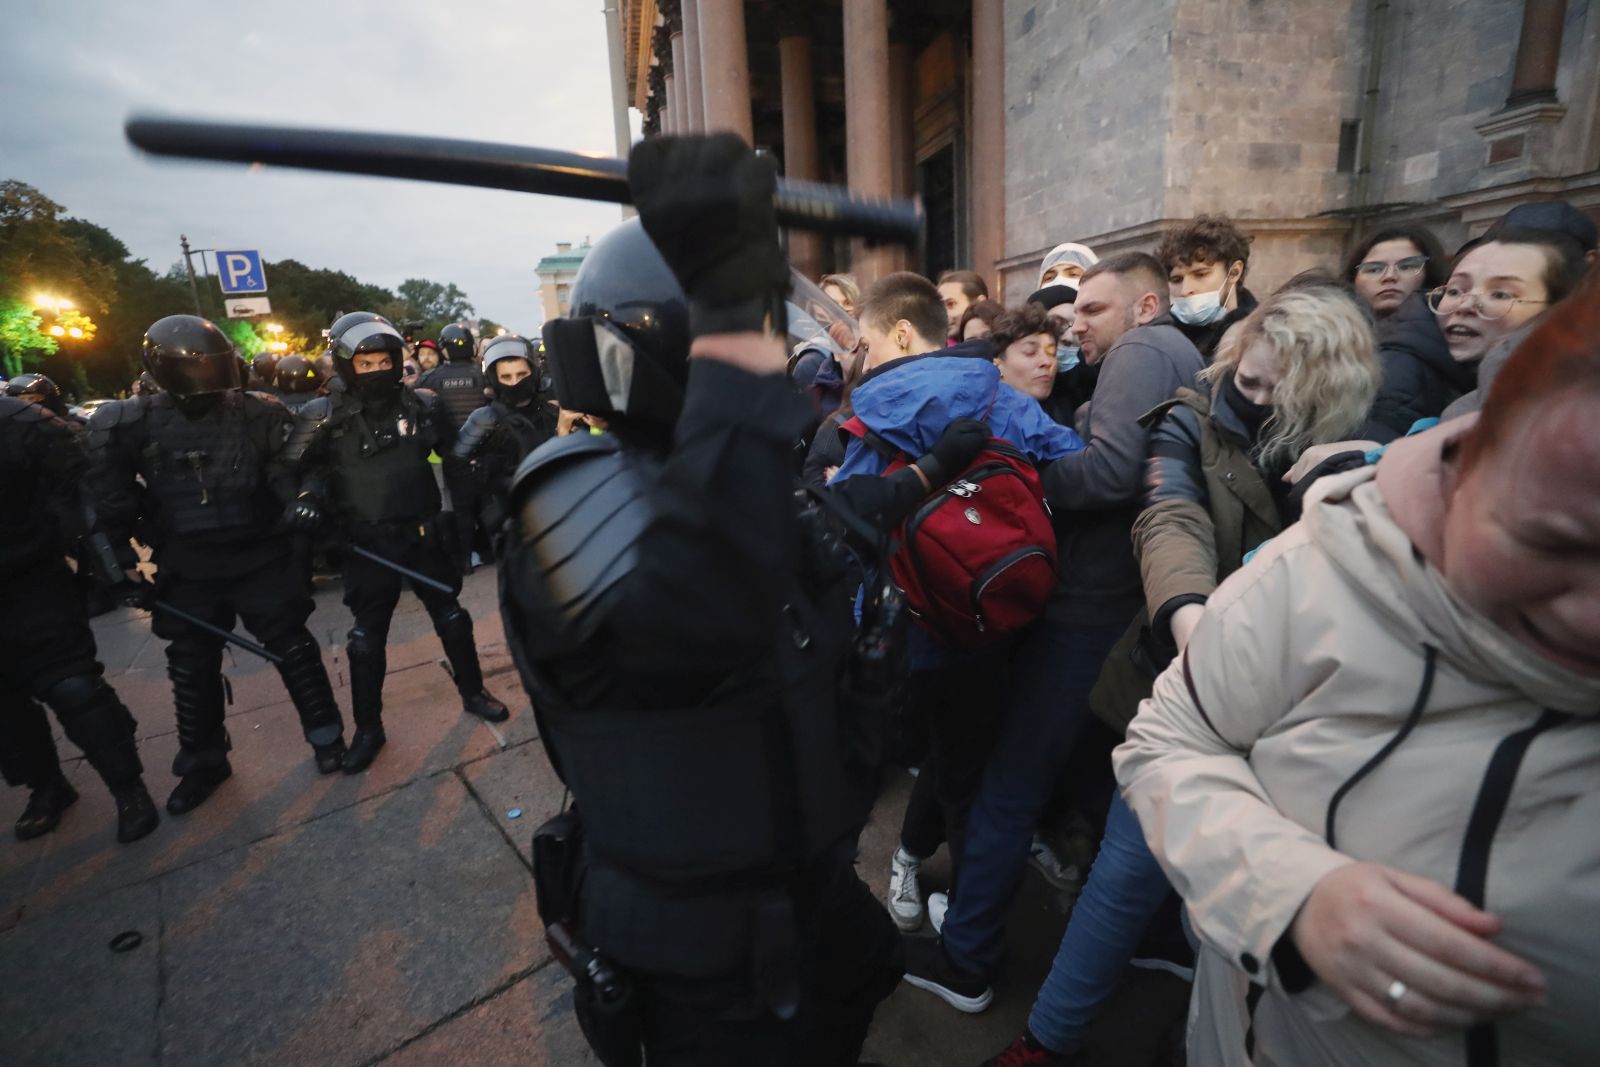 epa10197718 Russian policemen move in to detain participants of an unauthorised protest against the partial mobilisation due to the conflict in Ukraine, in central St. Petersburg, Russia, 21 September 2022. Russian President President Putin has signed a decree on partial mobilization in the Russian Federation, with mobilization activities starting on 21 September. Russian citizens who are in the reserve will be called up for military service. On 24 February 2022 Russian troops entered the Ukrainian territory in what the Russian president declared a 'Special Military Operation', starting an armed conflict that has provoked destruction and a humanitarian crisis.  EPA/ANATOLY MALTSEV